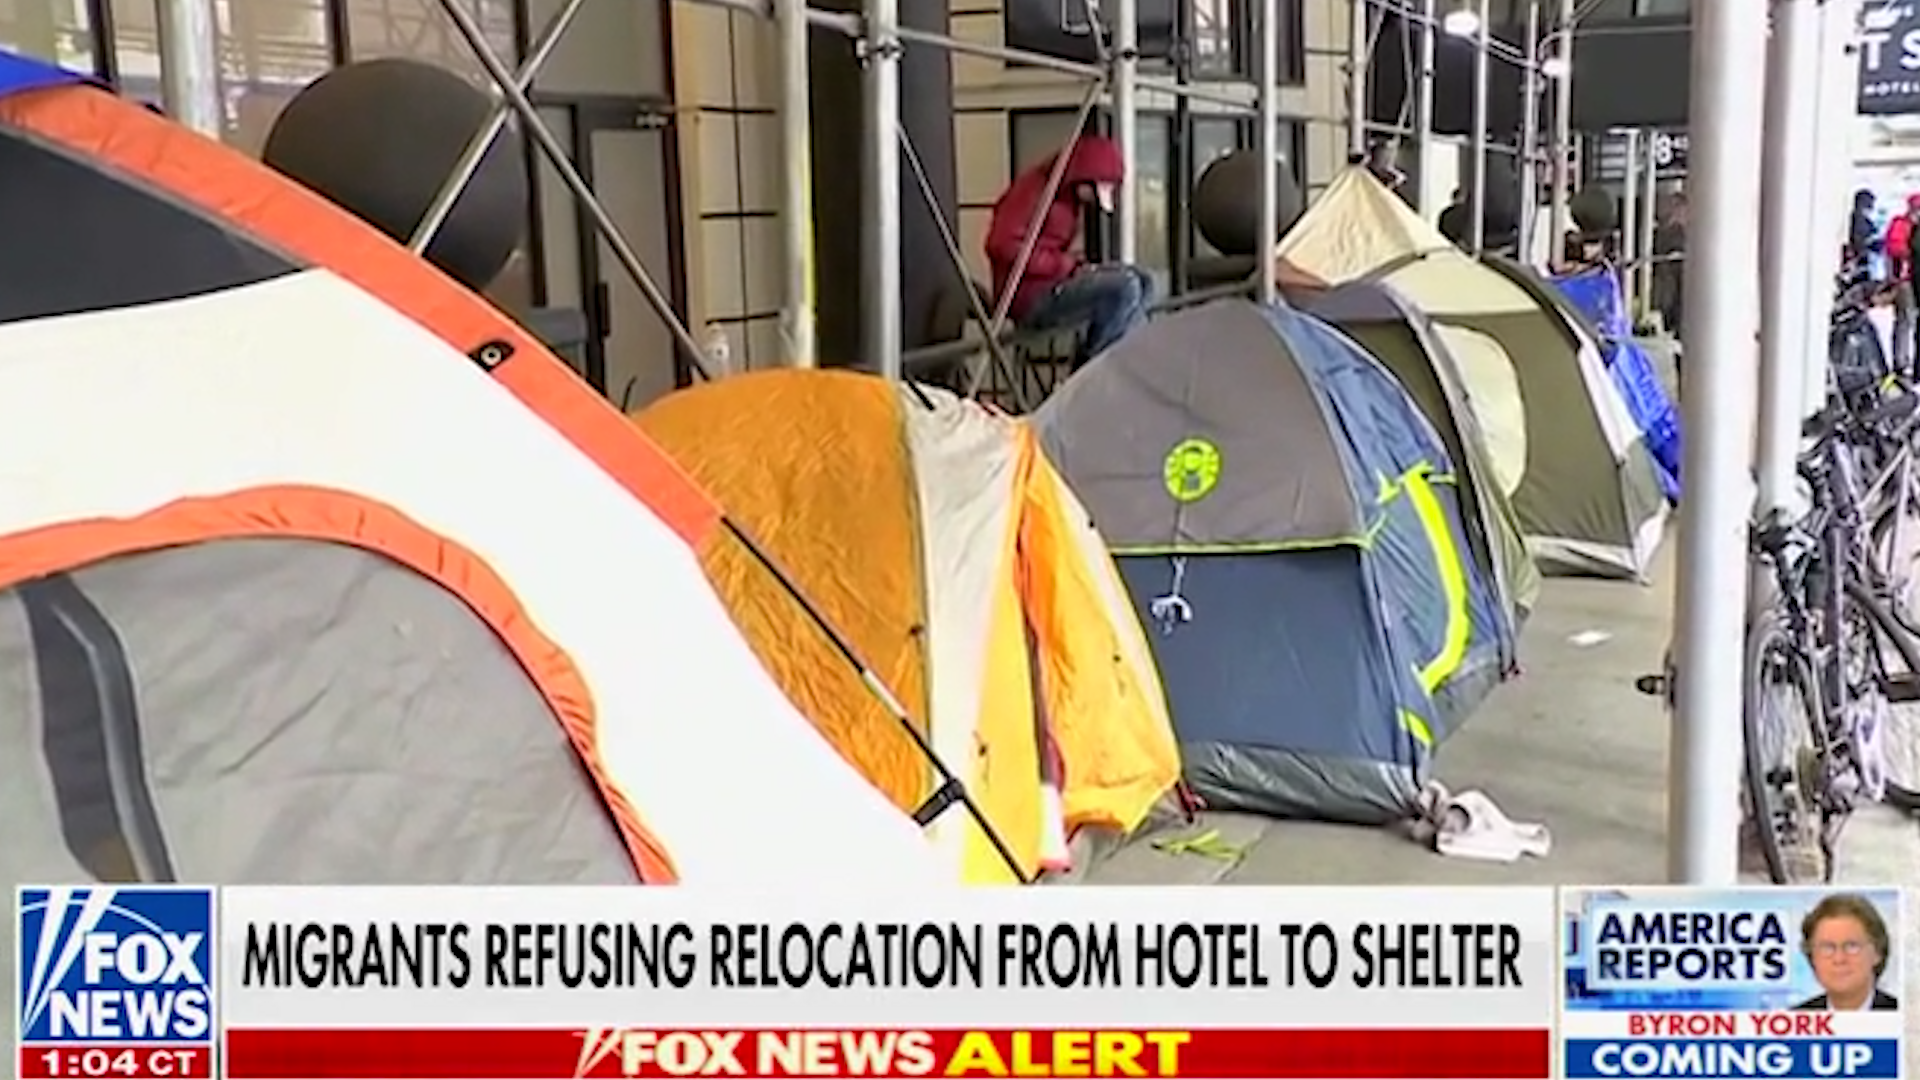 Illegals Wont Leave Hotel